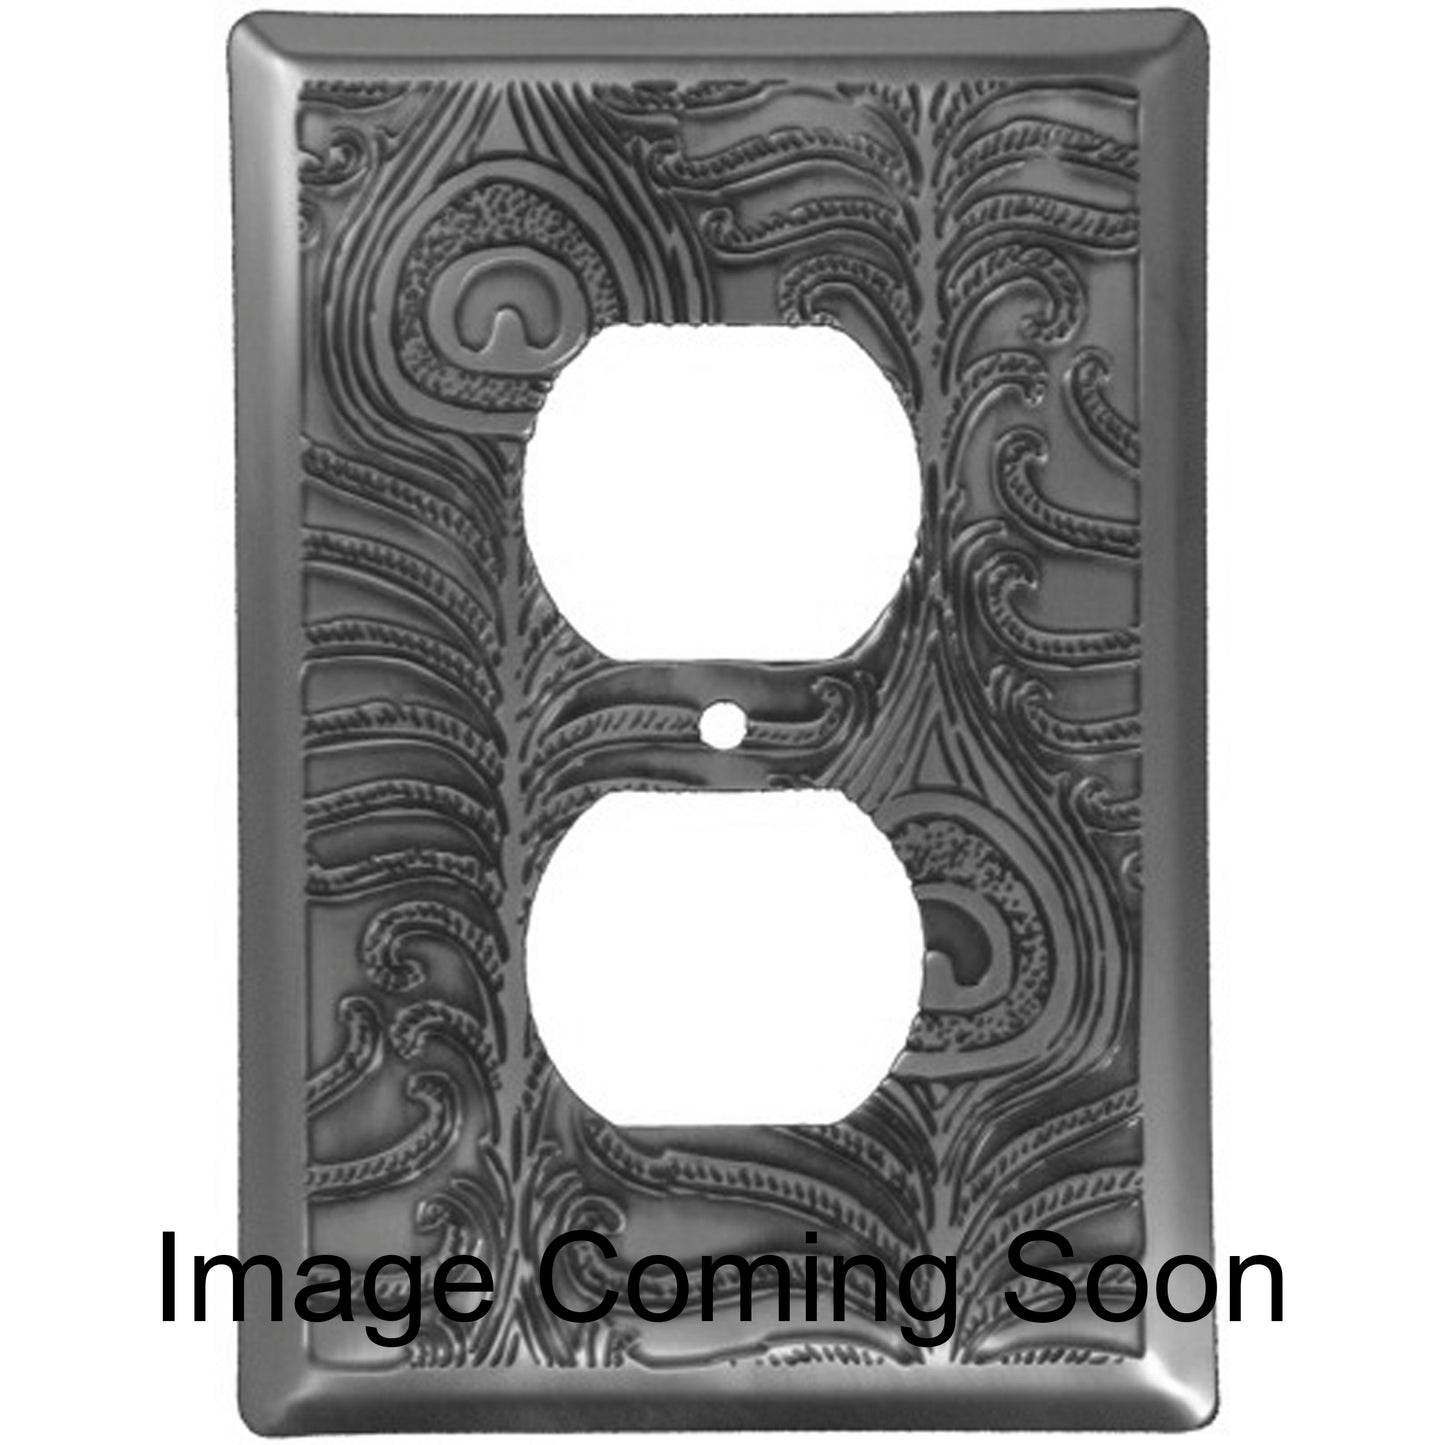 Peacock Stainless Steel Duplex Outlet Switchplate